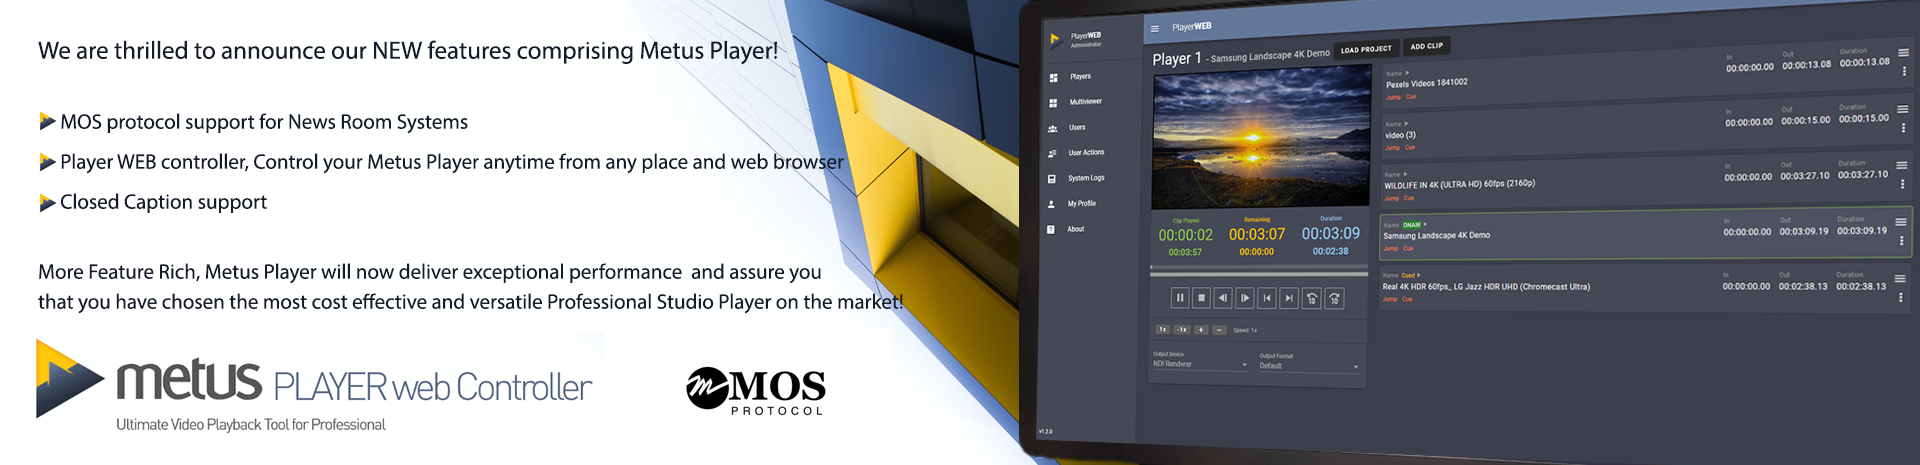 Metus Player new features